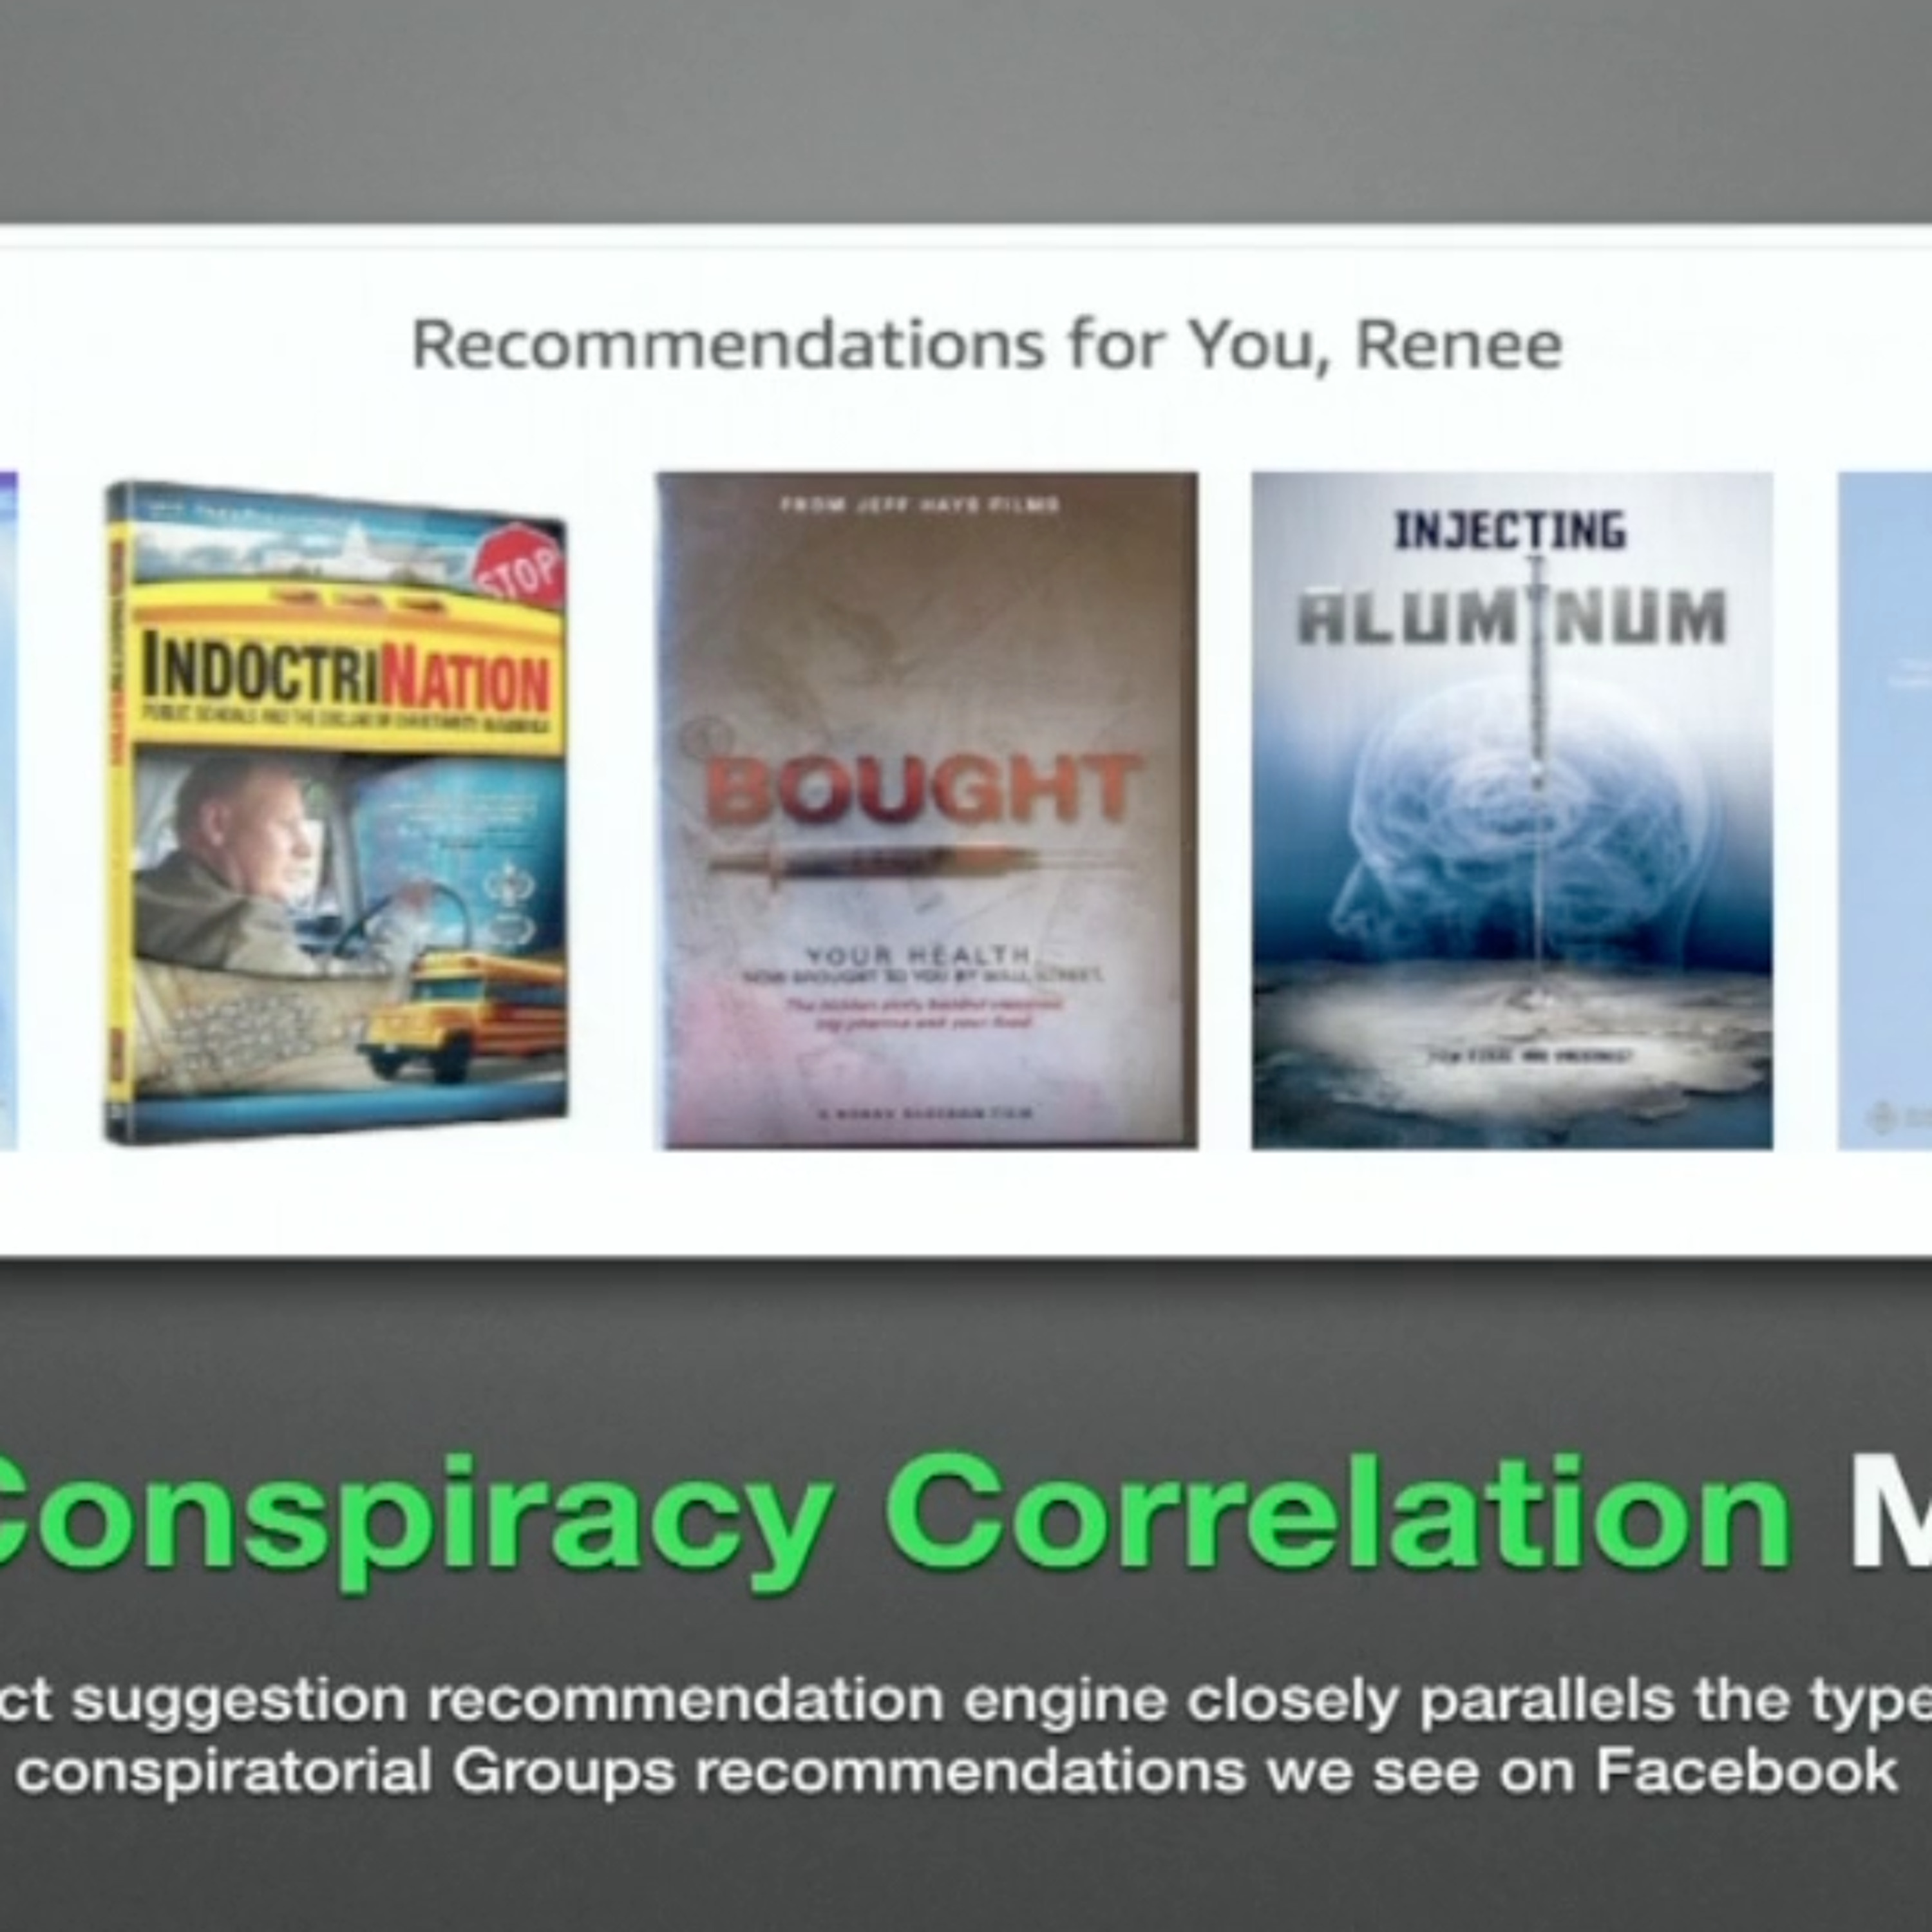 How Social Network Manipulation Tactics Are Impacting Amazon & Influencing Consumers